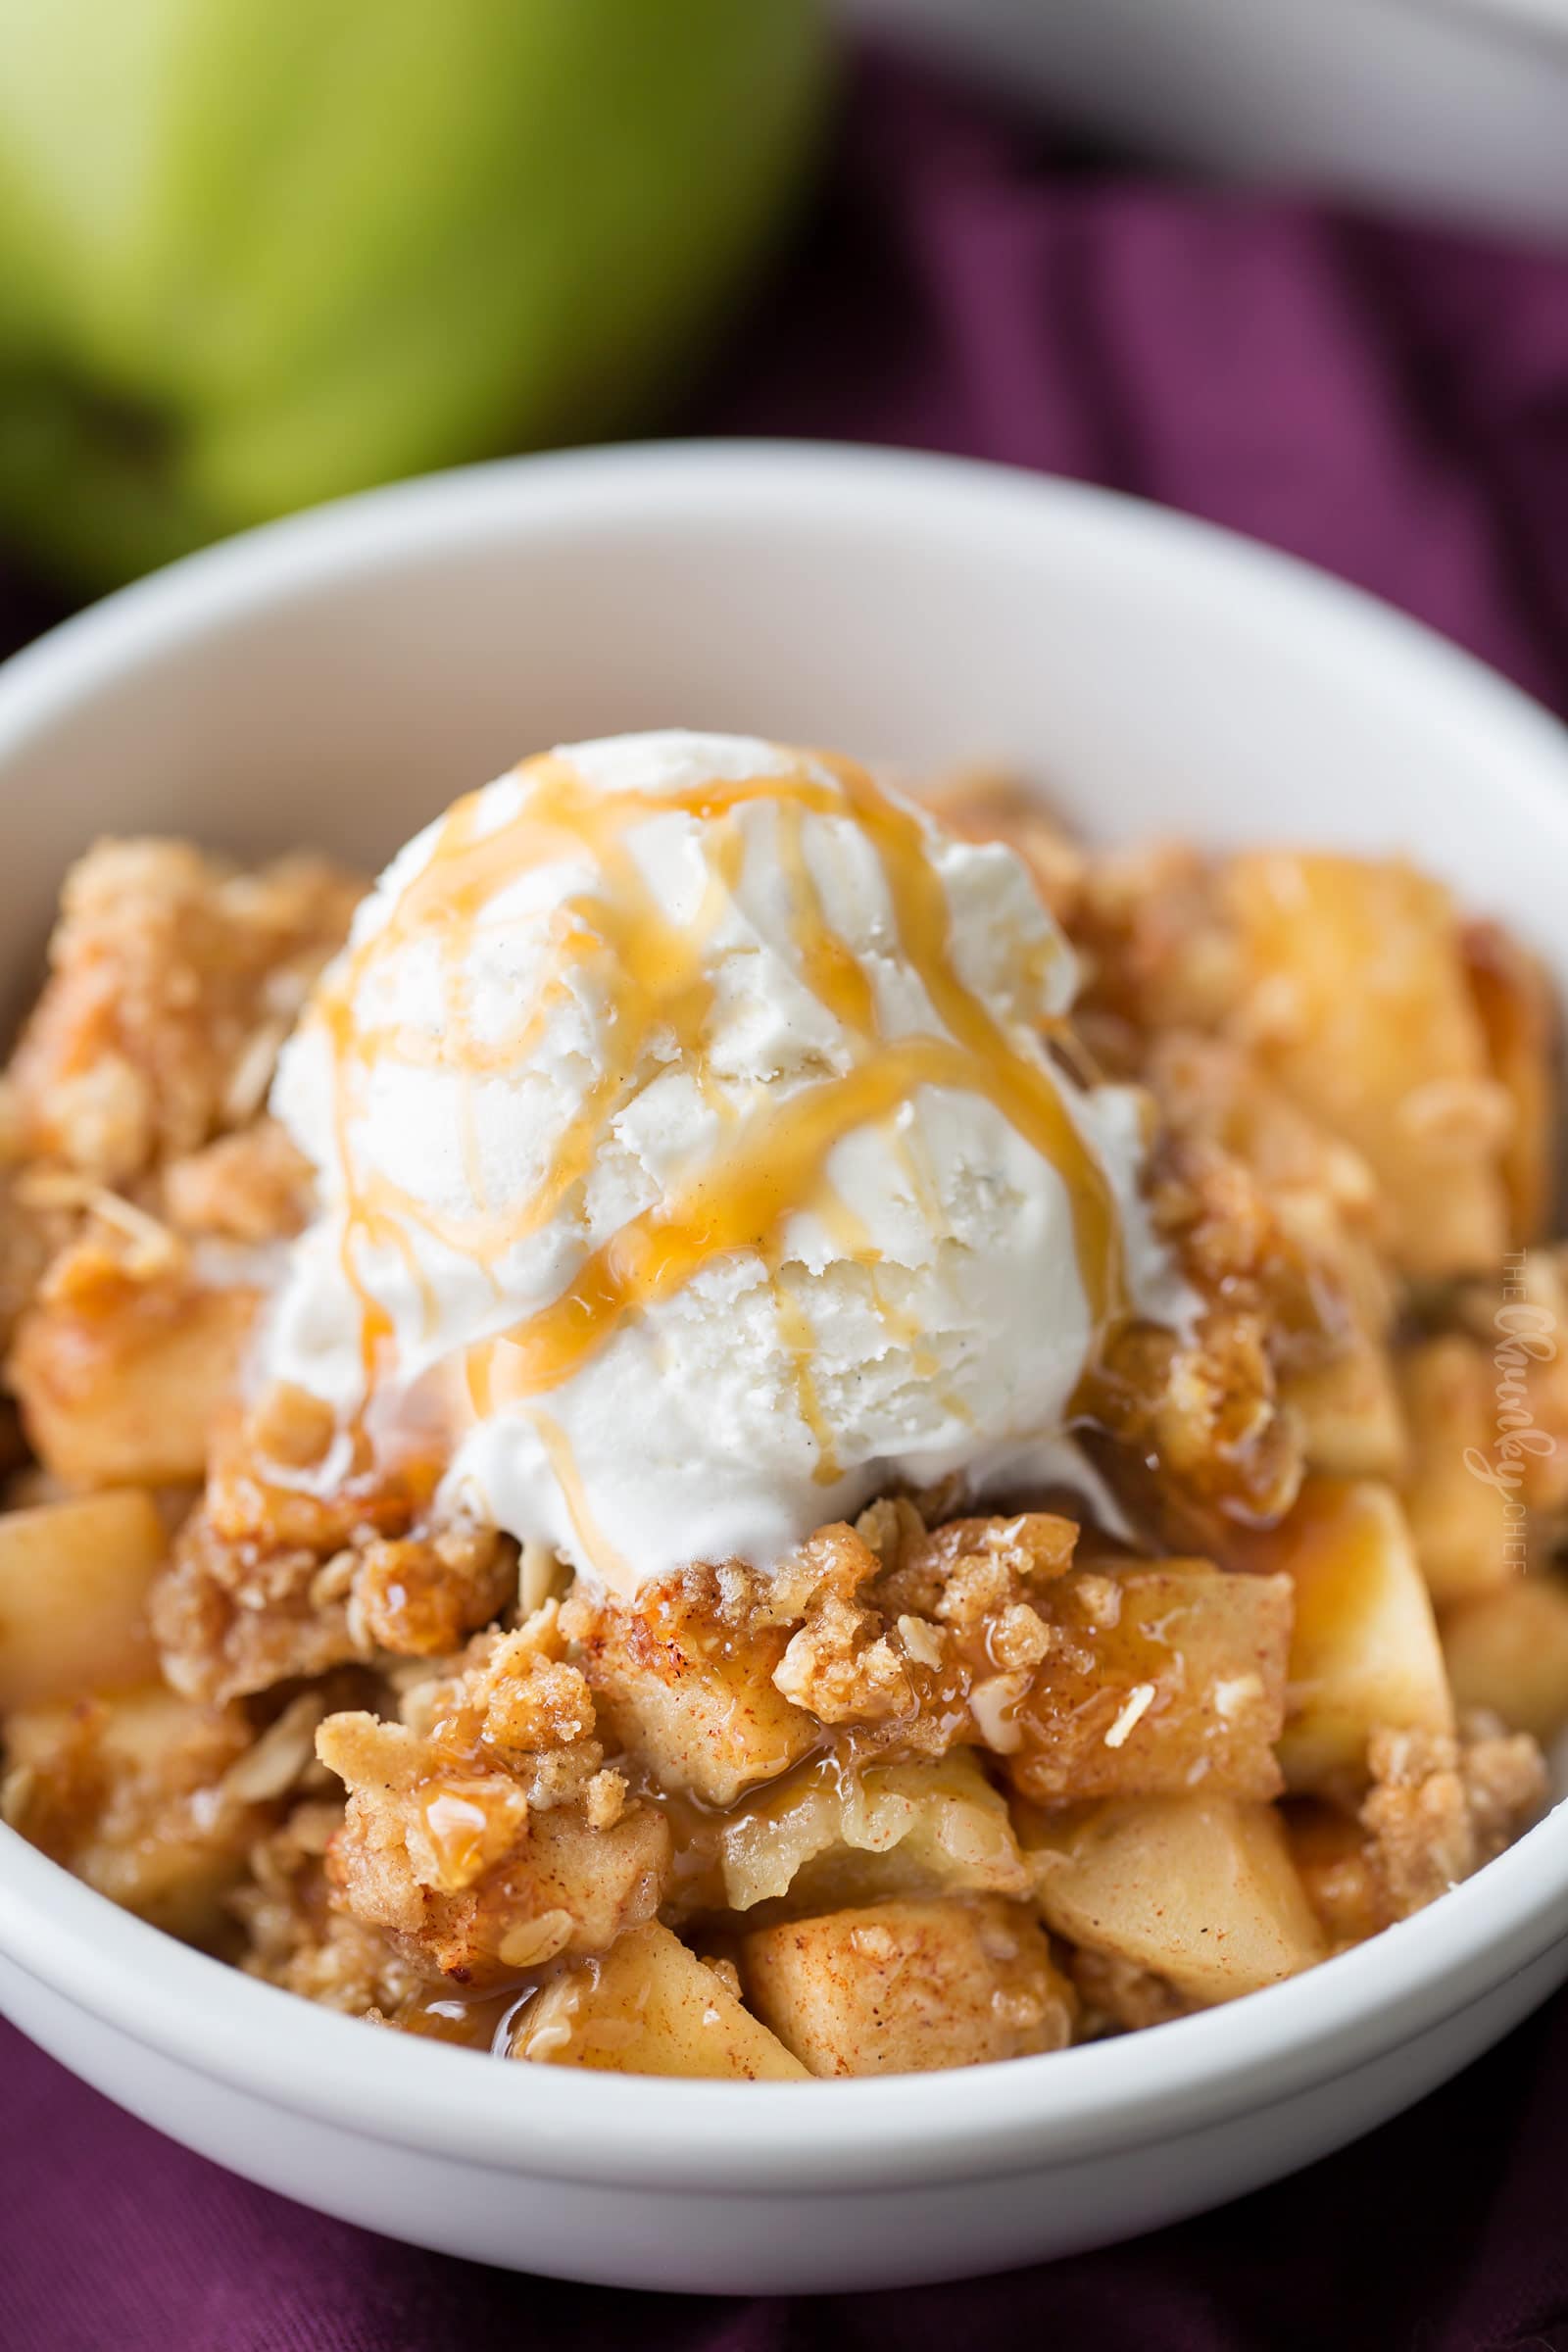 https://www.thechunkychef.com/wp-content/uploads/2017/10/Old-Fashioned-Easy-Apple-Crisp-8.jpg